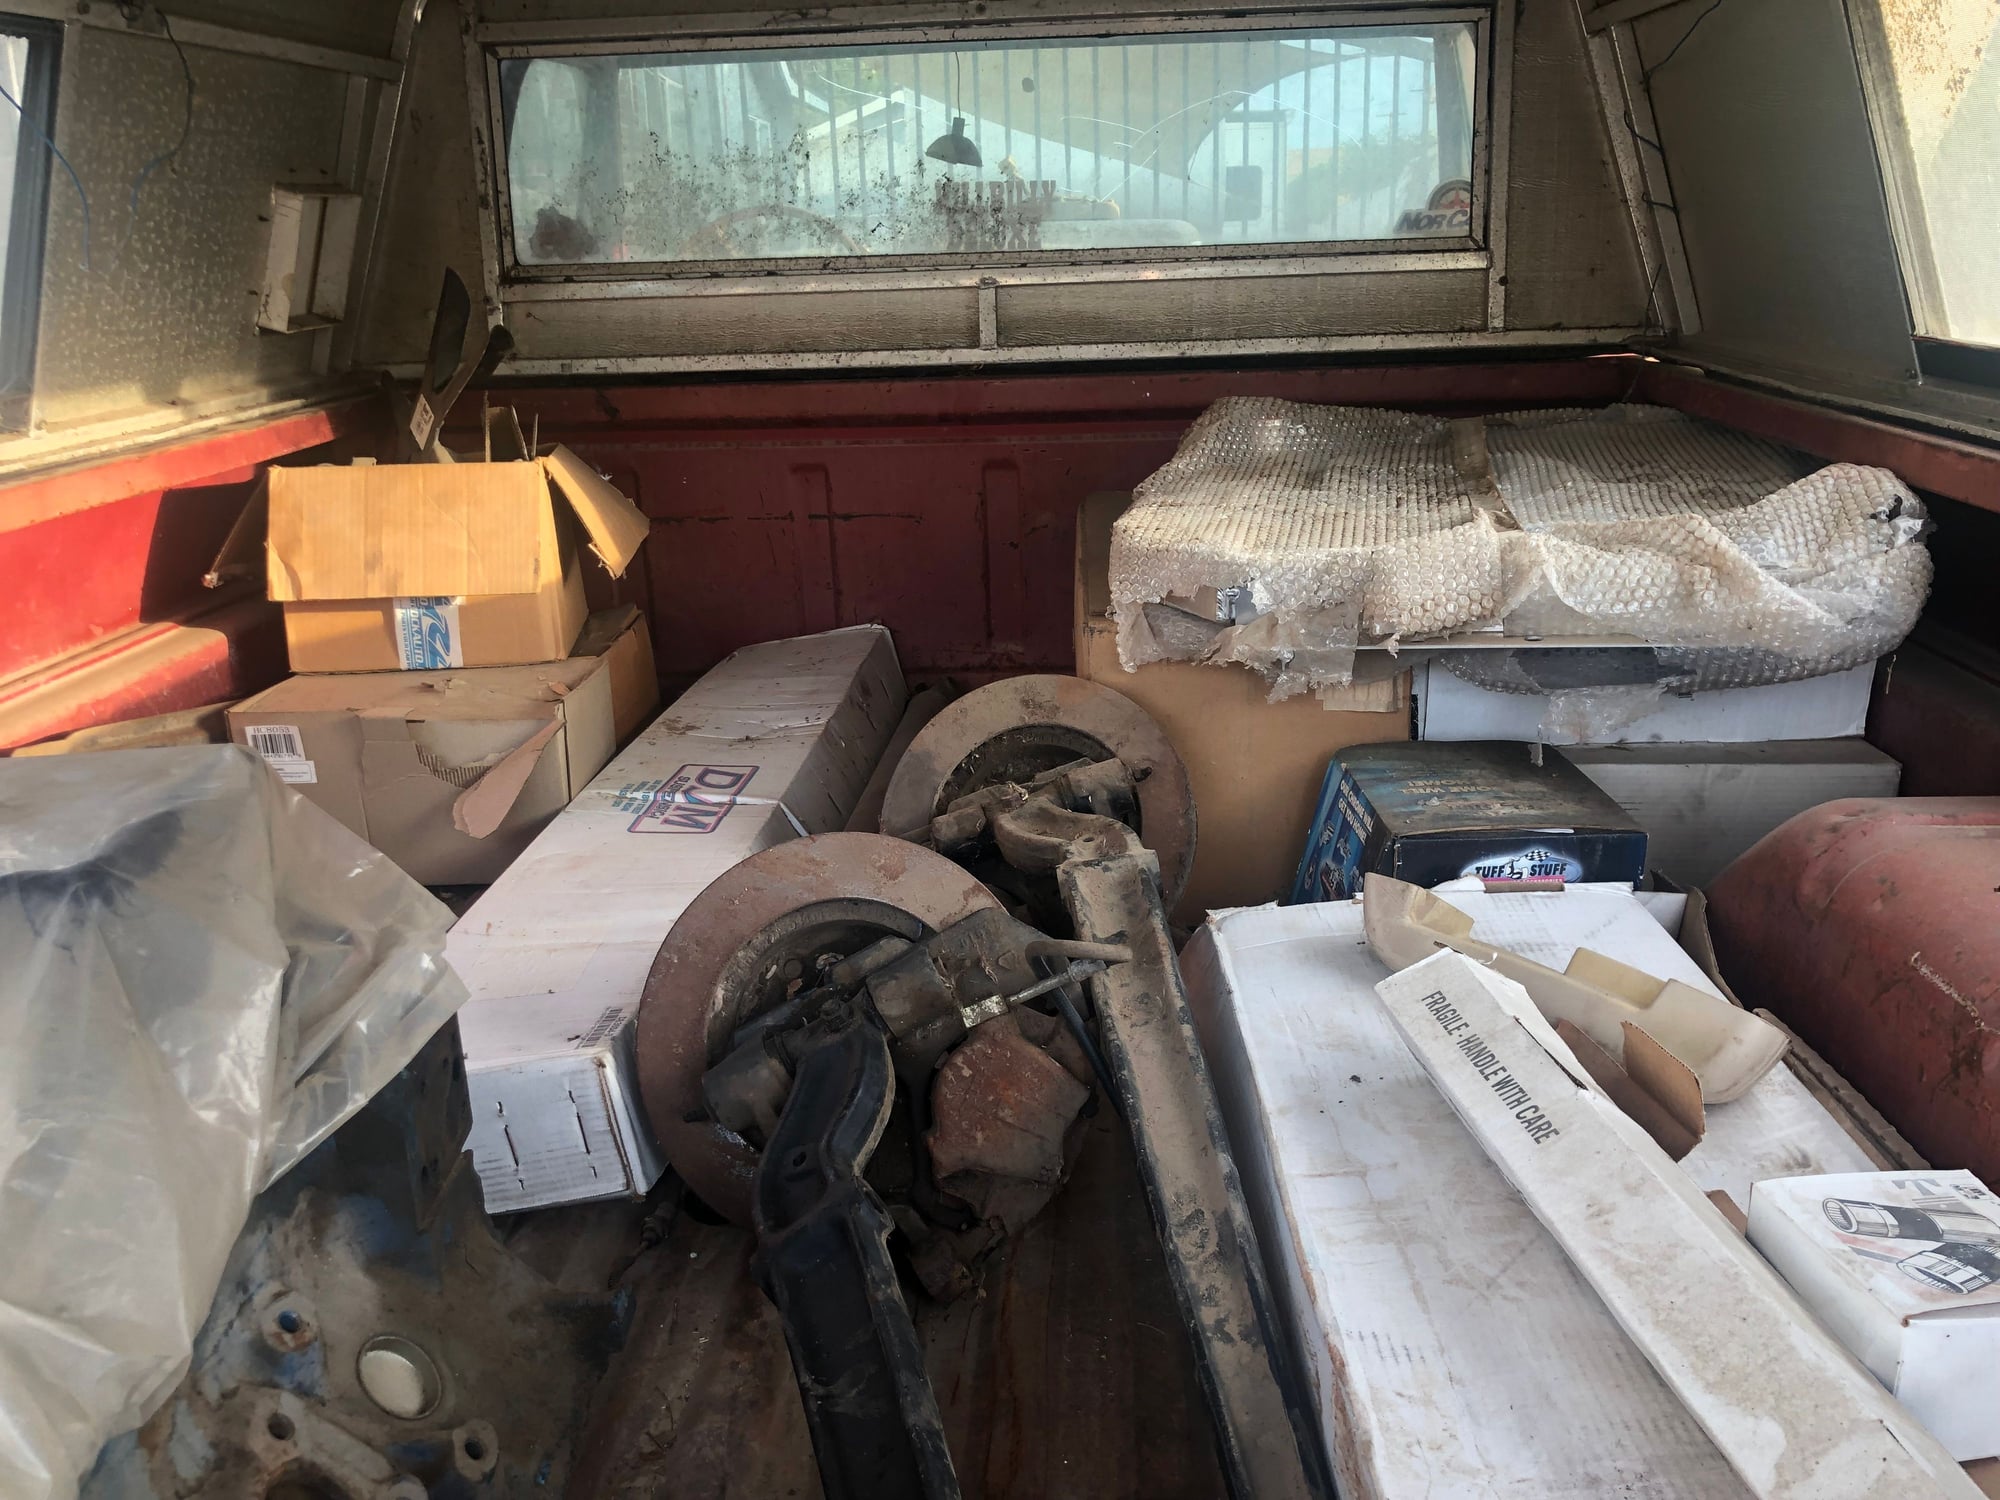 1971 Ford F-100 - f100 parts complete project sell or trade - Used - Fresno, CA 93703, United States